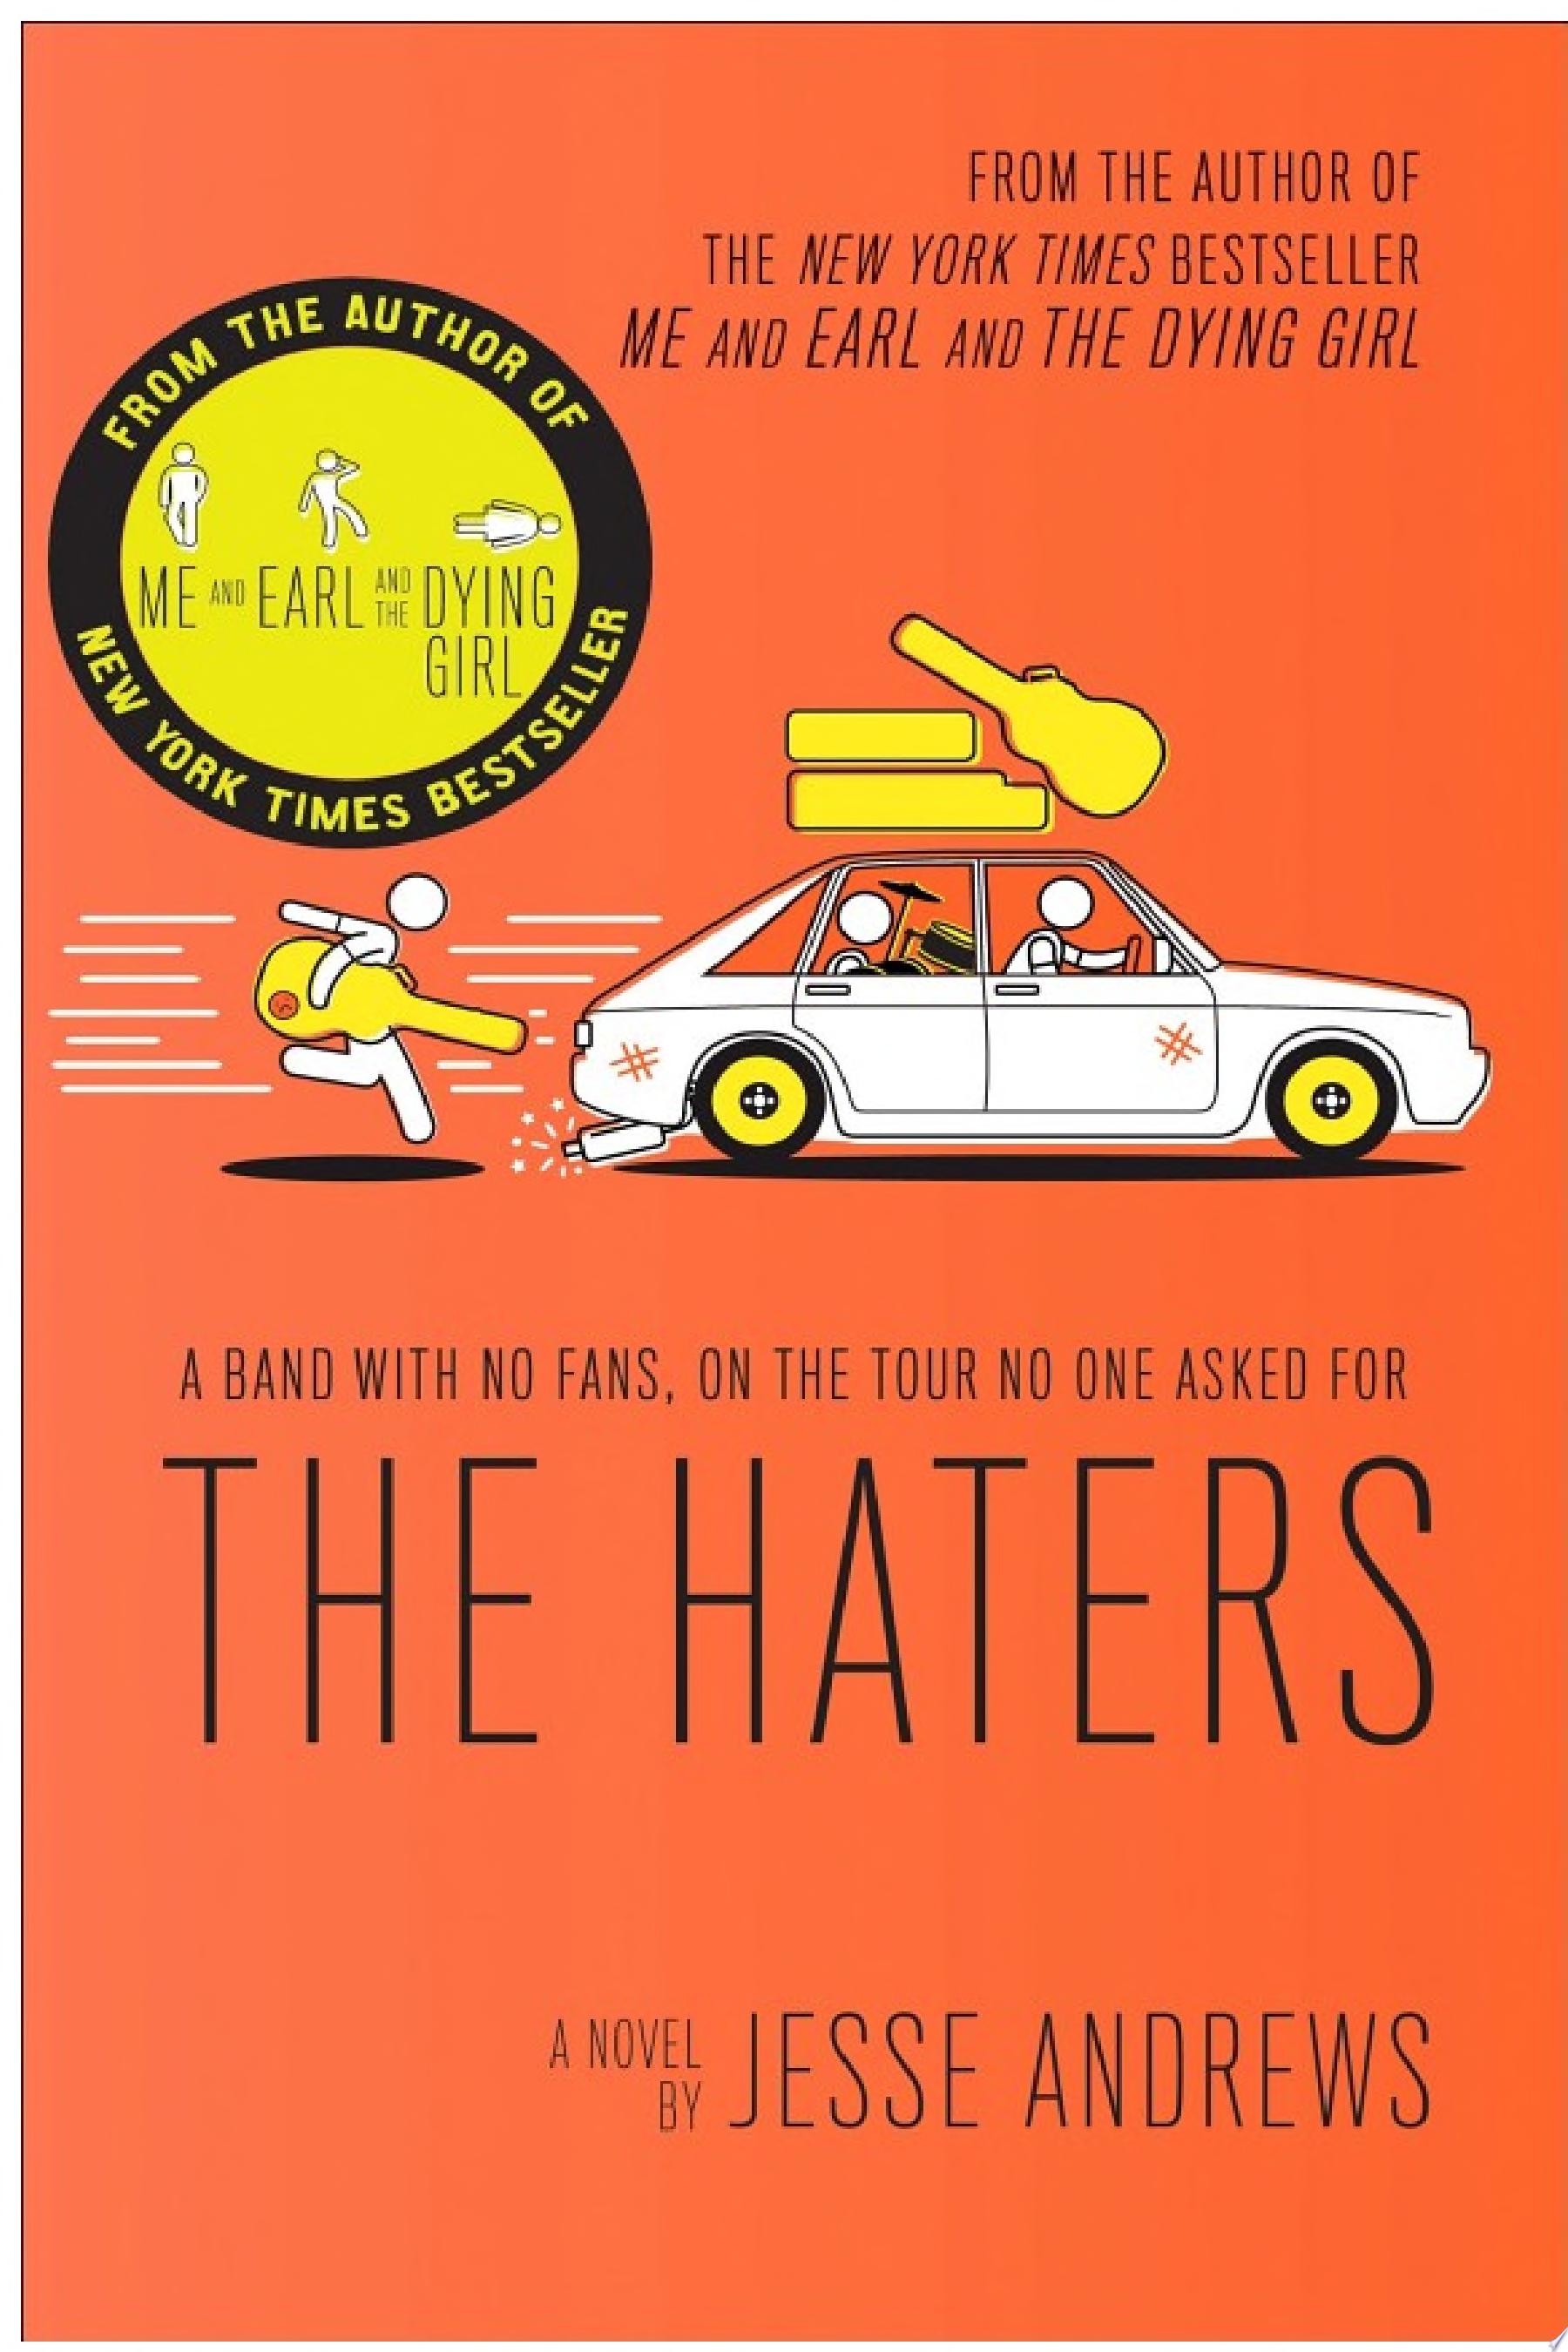 Image for "The Haters"